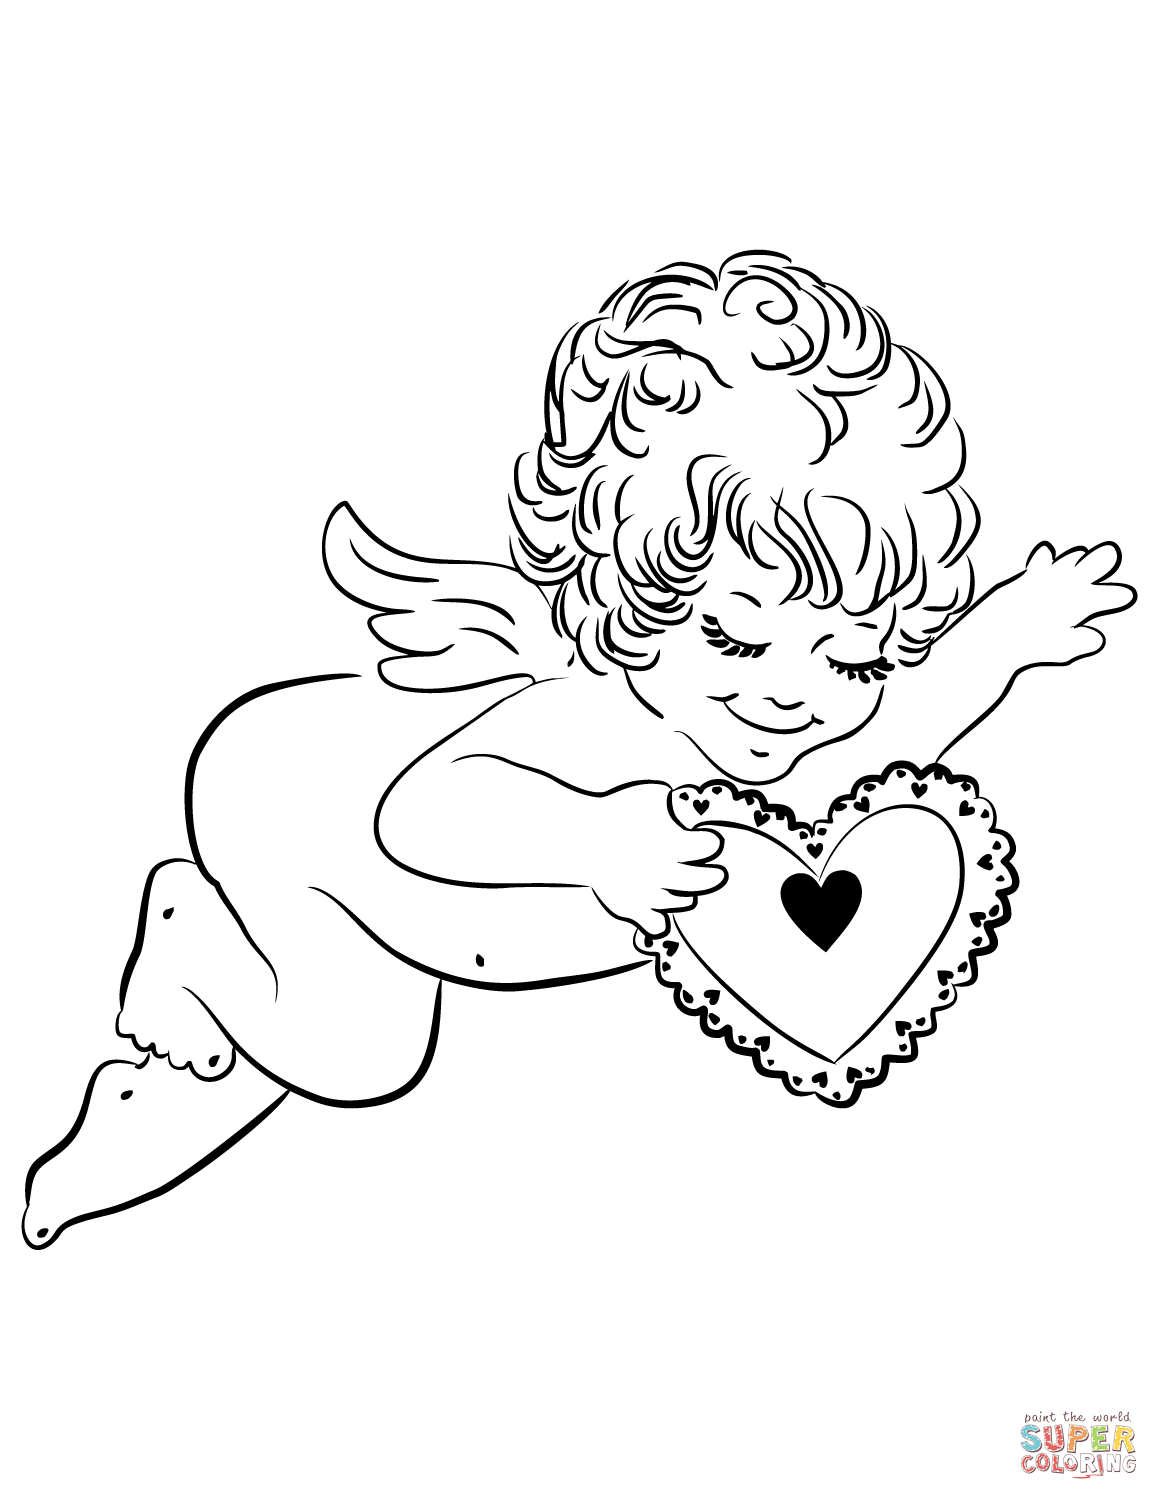 Cupid Coloring Pages Free Printable | Coloring Pages - Free Printable Pictures Of Cupid